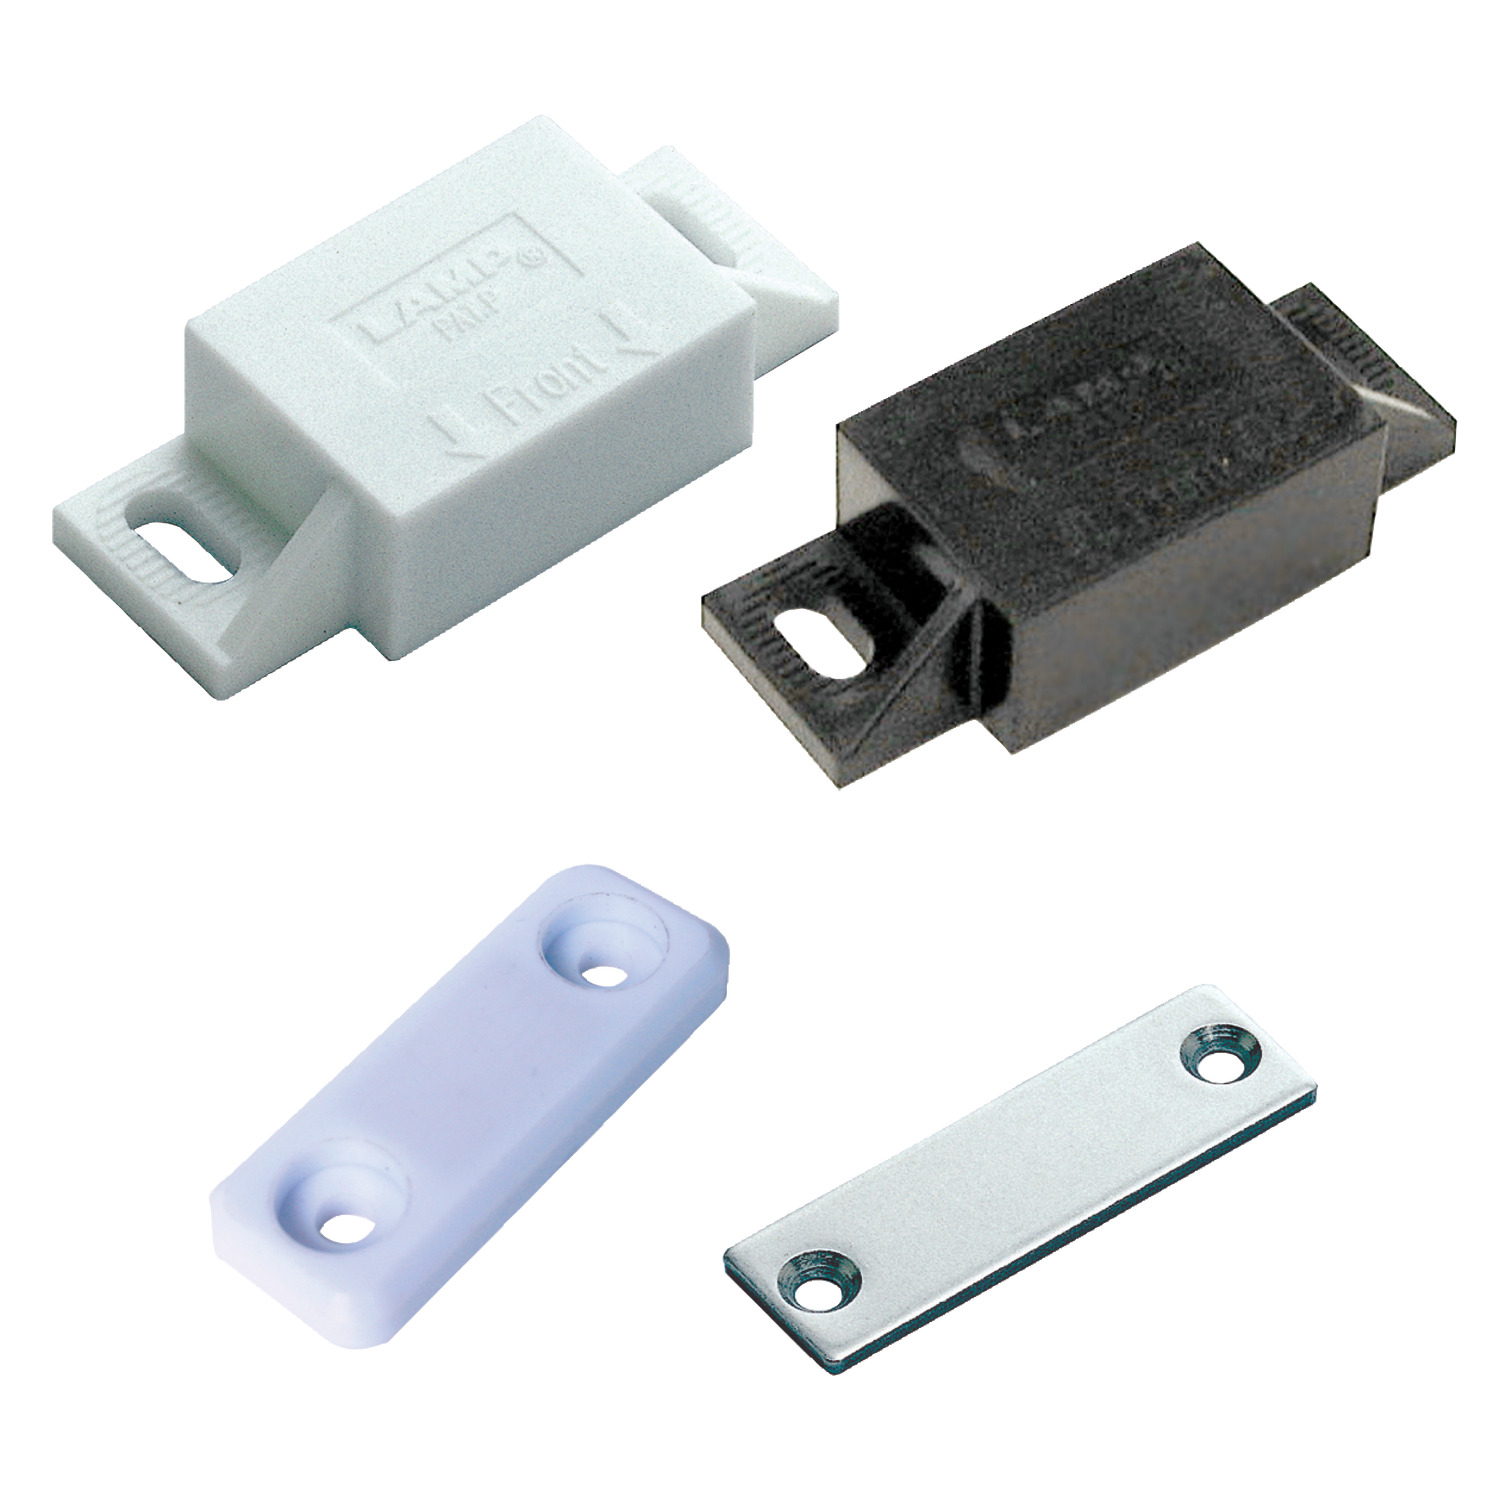 Product E5300, Magnetic Catches - Hermetically Sealed for clean room and medical environments / 